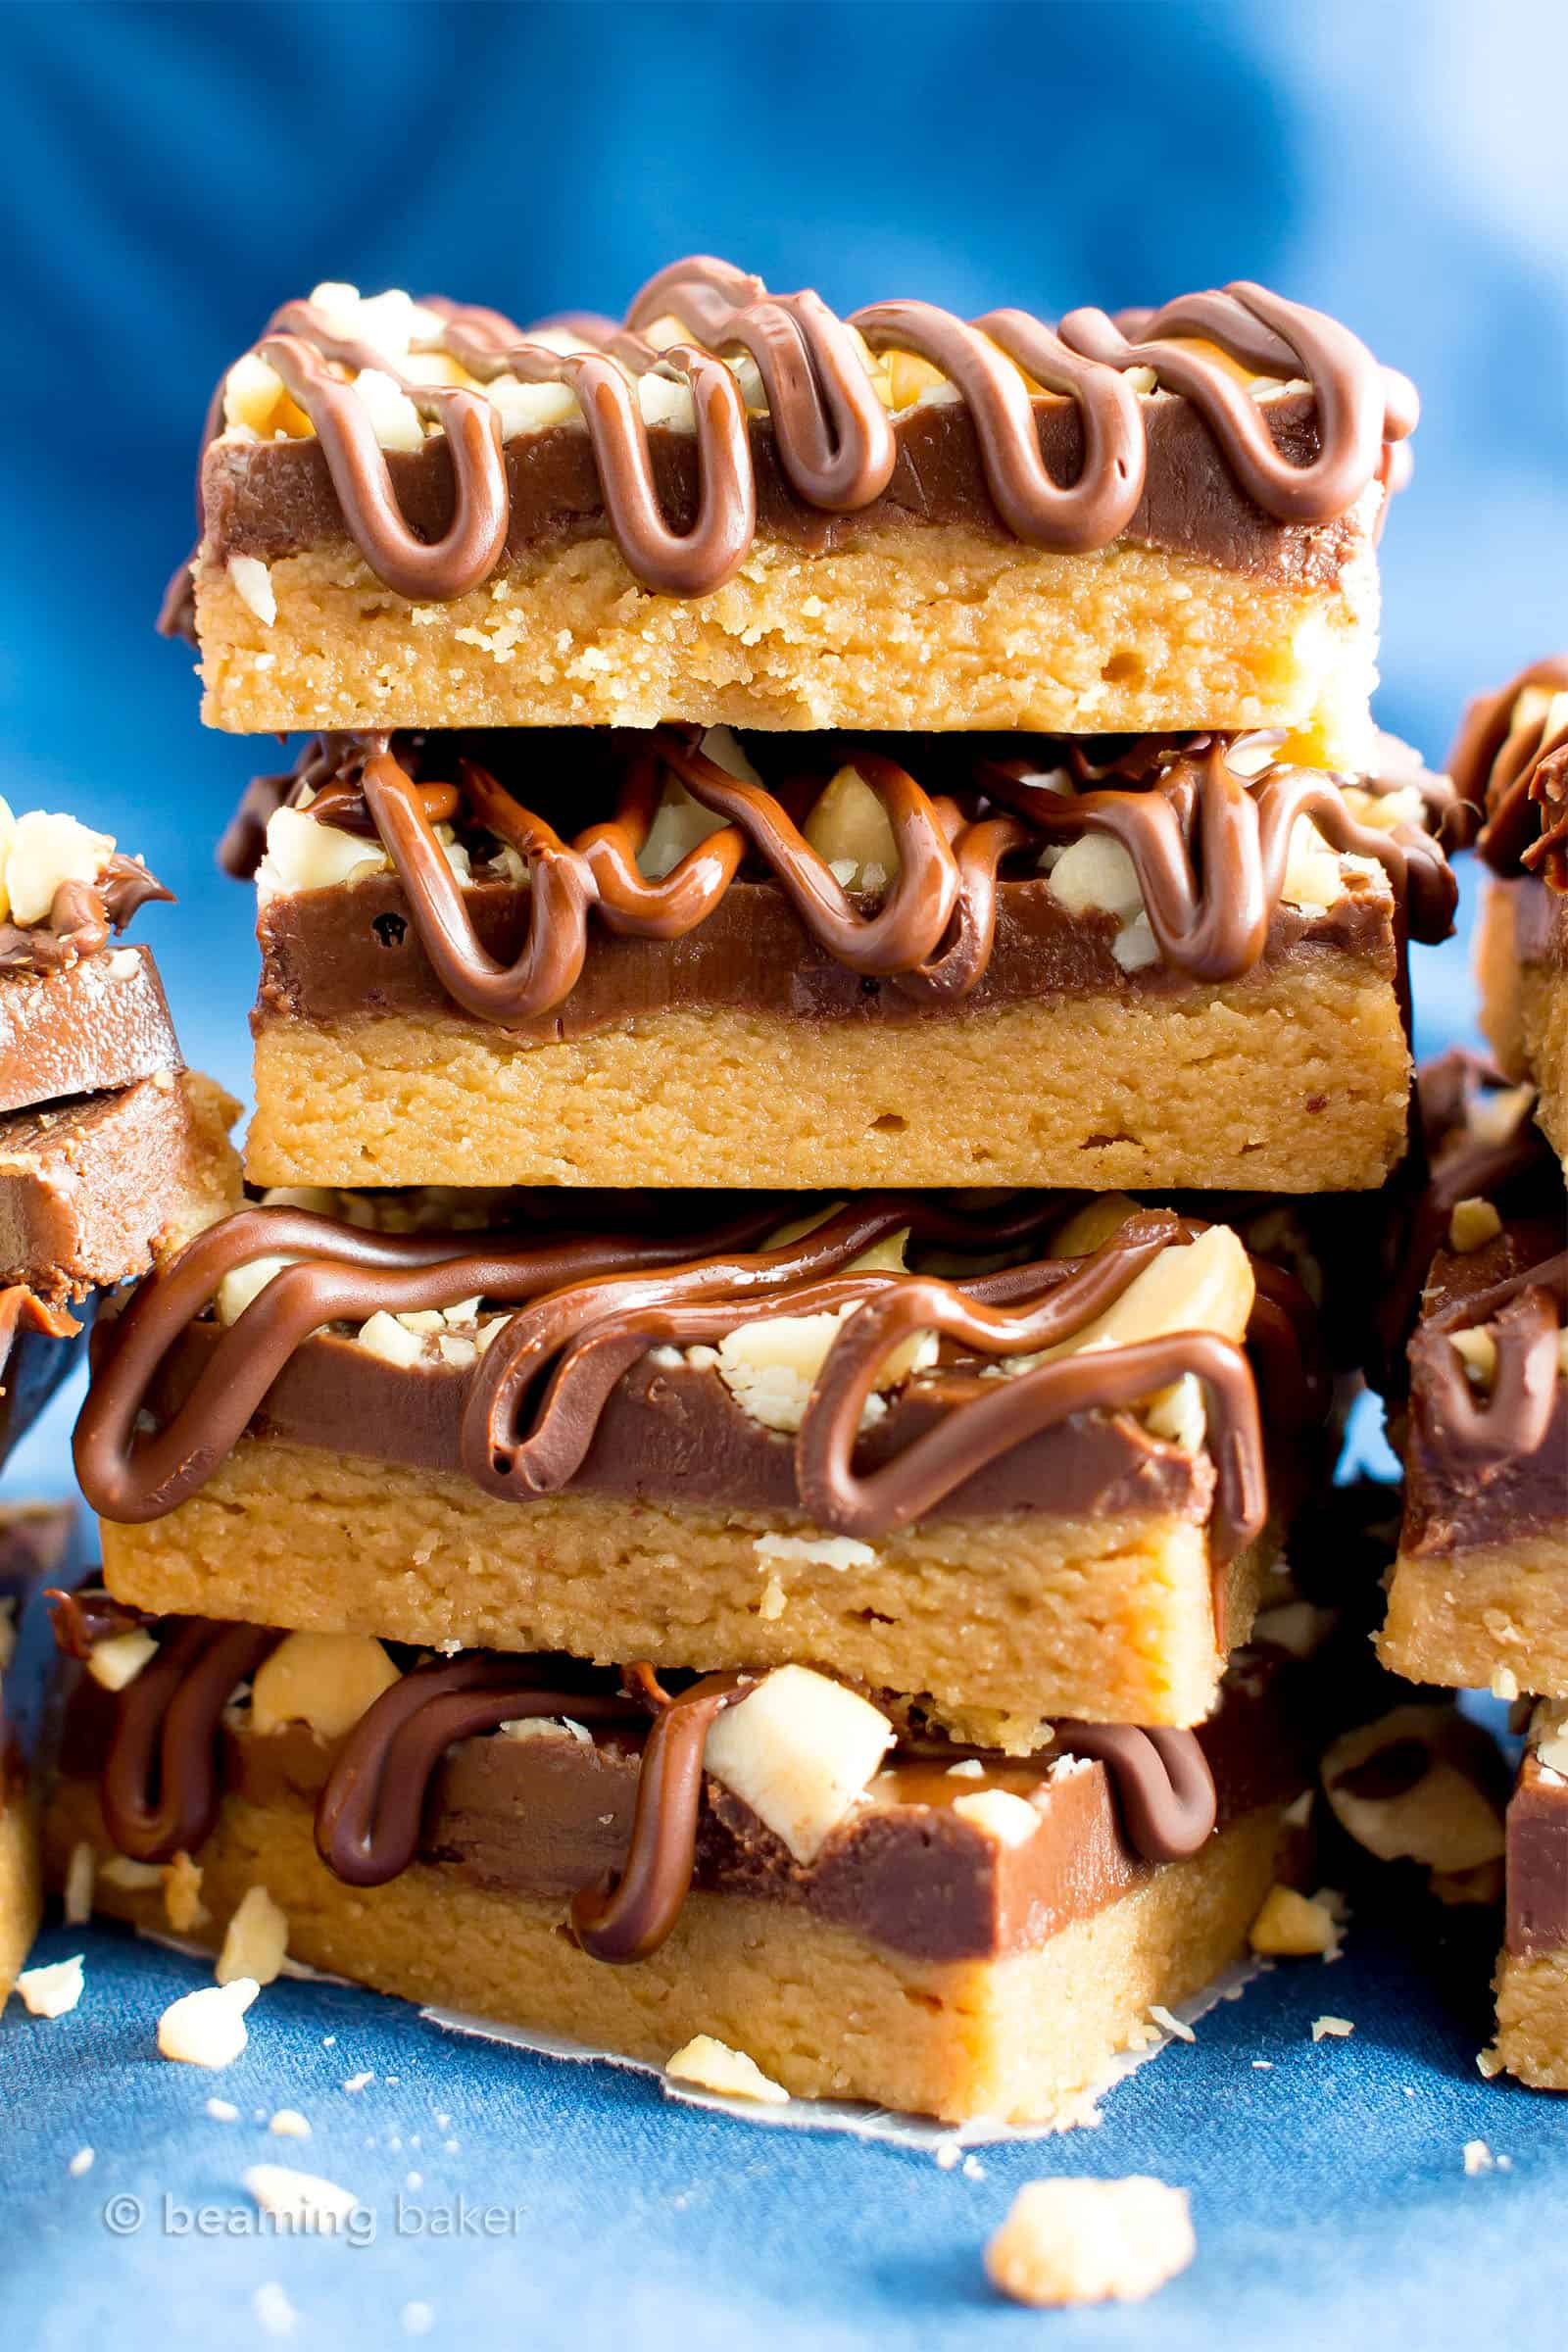 No Bake Peanut Butter Bars (Healthy): the ultimate healthy no bake peanut butter bars—just 5 ingredients, with thick layers of chocolate & peanut butter, a crunchy topping & velvety chocolate drizzle. #PeanutButterBars #Healthy #NoBake #Chocolate #PeanutButter | Recipe at BeamingBaker.com